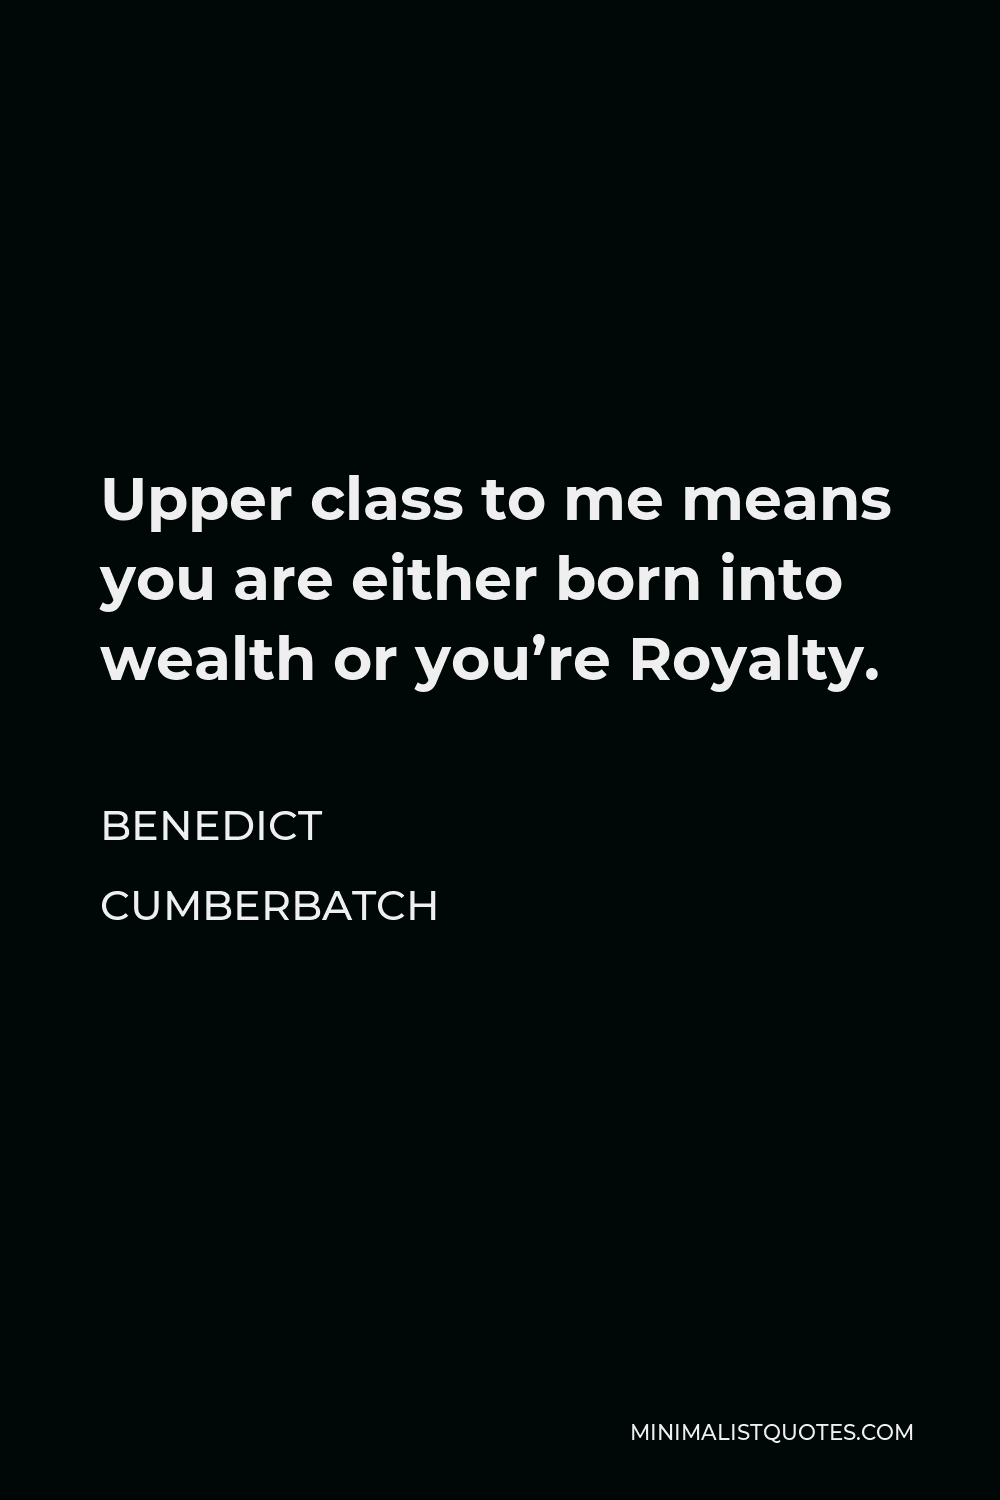 Benedict Cumberbatch Quote - Upper class to me means you are either born into wealth or you’re Royalty.